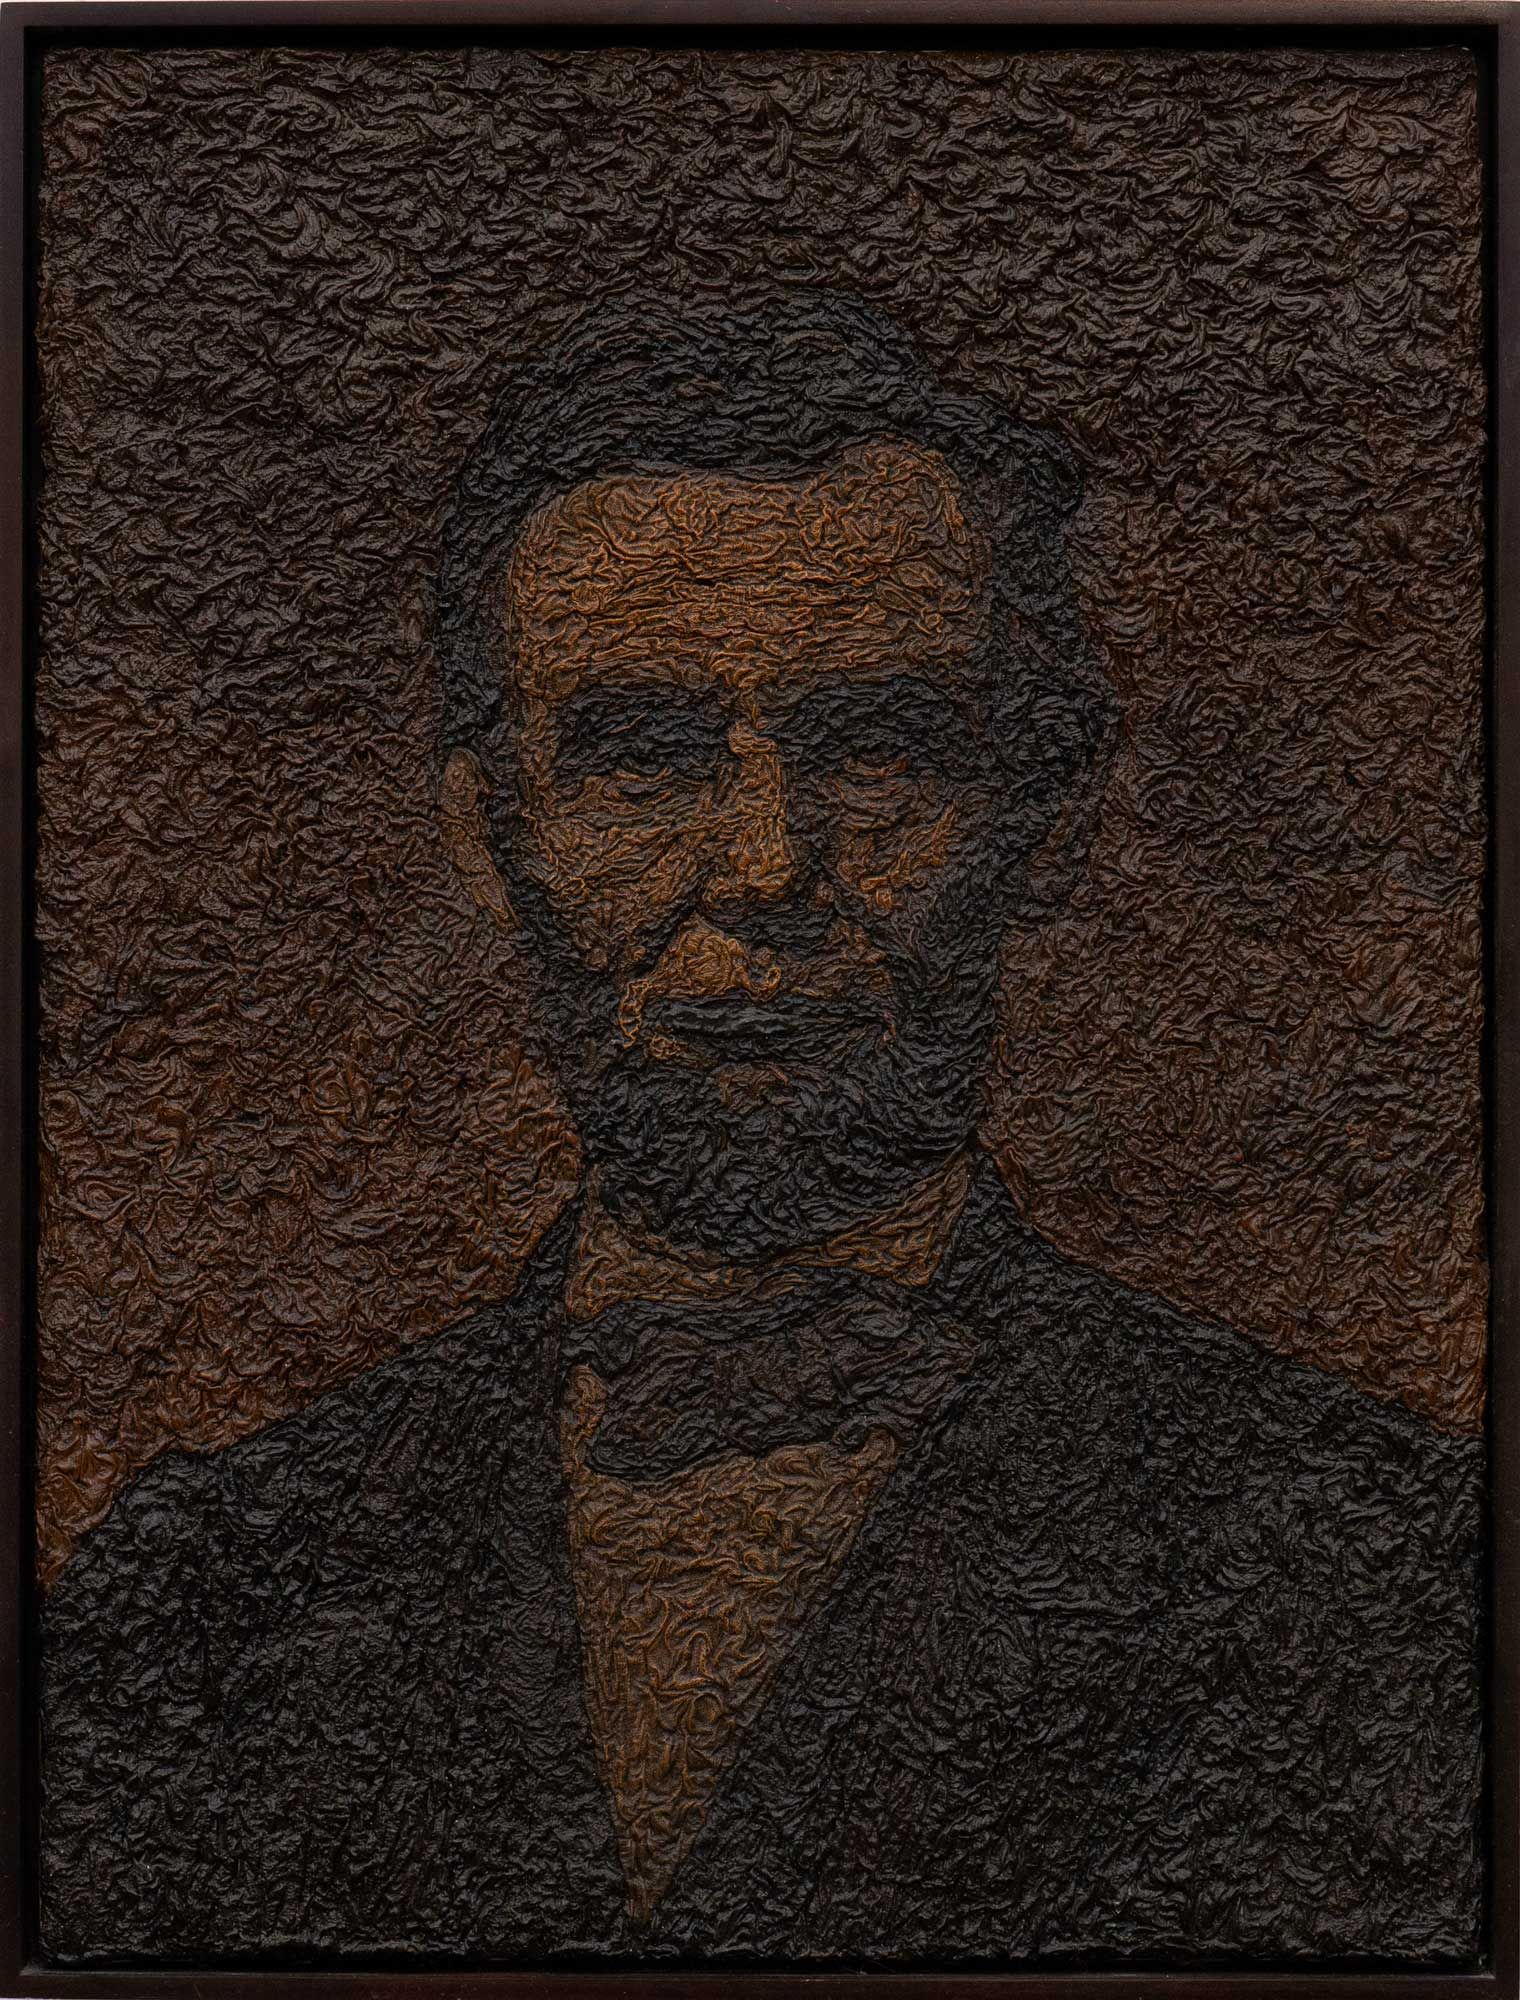 Reinvention of famous Abraham Lincoln image by Mark Alexander using thick and dark oil paints.